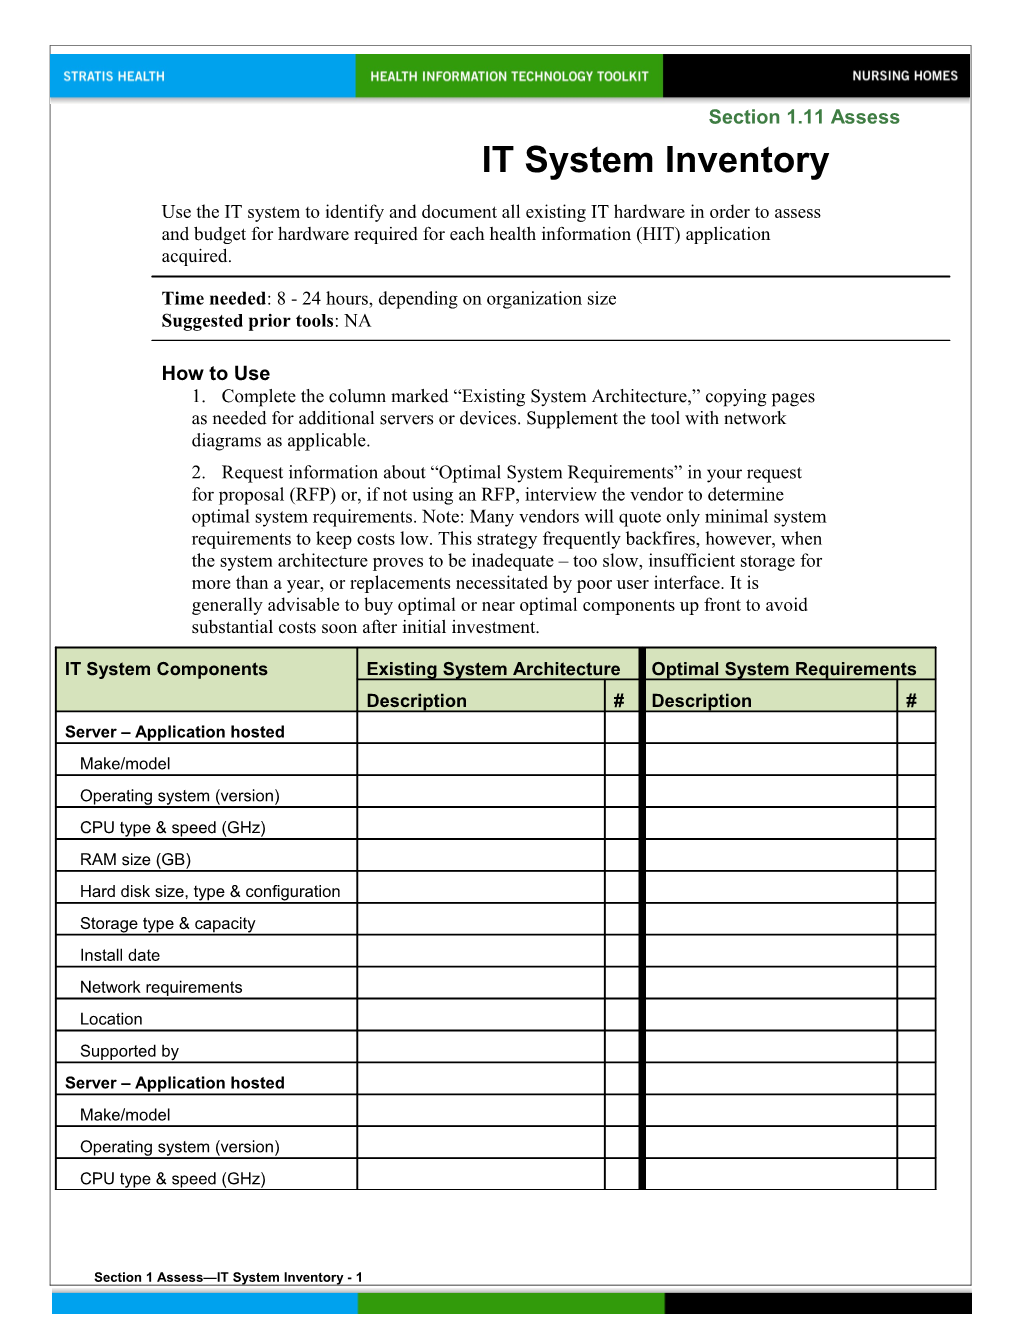 1 IT System Inventory